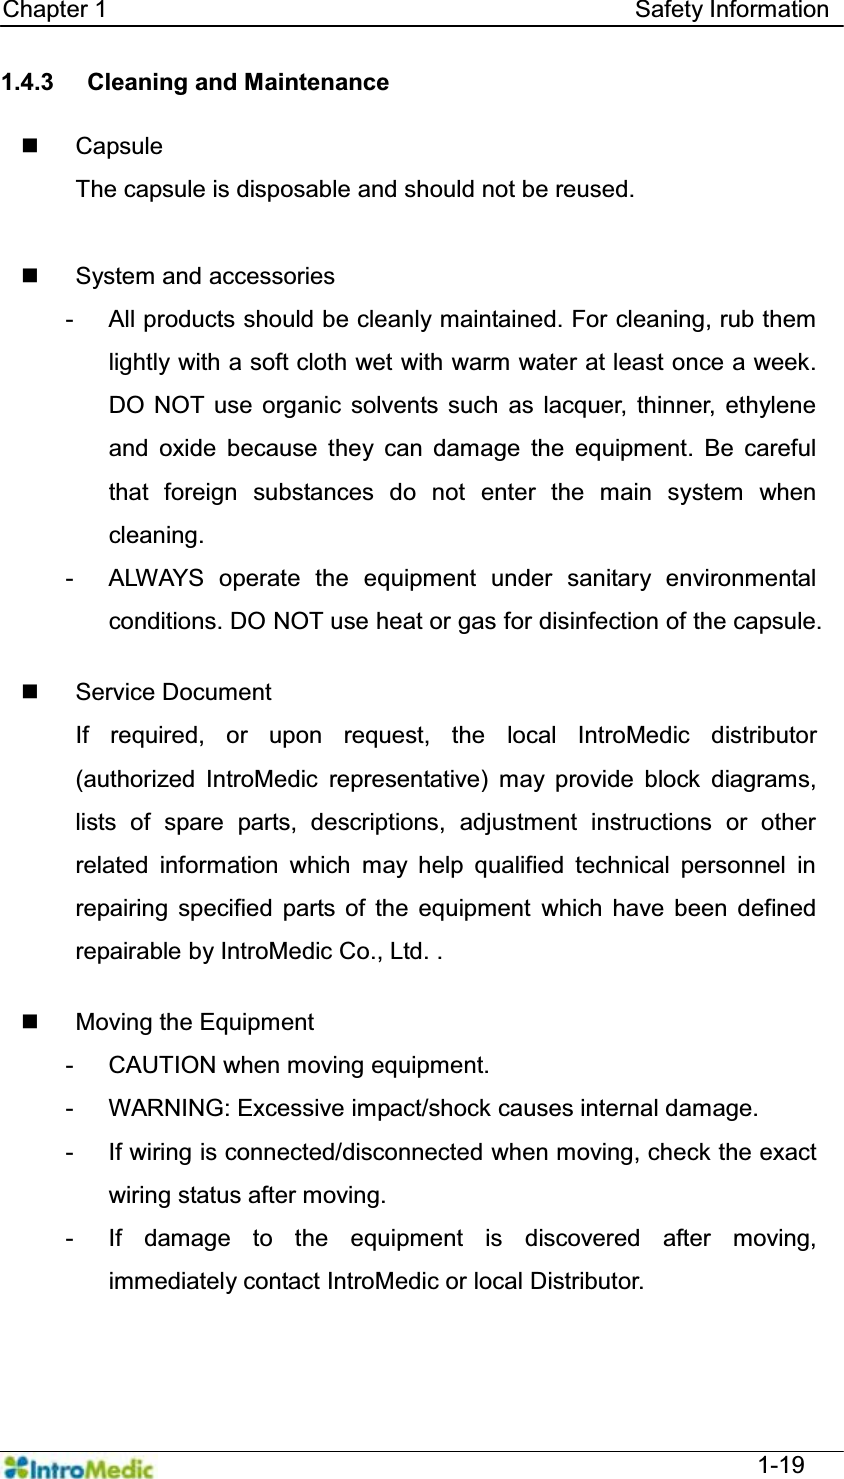   Chapter 1                                            Safety Information  1-19 1.4.3  Cleaning and Maintenance   Capsule The capsule is disposable and should not be reused.   System and accessories -  All products should be cleanly maintained. For cleaning, rub them lightly with a soft cloth wet with warm water at least once a week. DO NOT use organic solvents such as lacquer, thinner, ethylene and oxide because they can damage the equipment. Be careful that foreign substances do not enter the main system when cleaning.  -  ALWAYS operate the equipment under sanitary environmental conditions. DO NOT use heat or gas for disinfection of the capsule.     Service Document If required, or upon request, the local IntroMedic distributor (authorized IntroMedic representative) may provide block diagrams, lists of spare parts, descriptions, adjustment instructions or other related information which may help qualified technical personnel in repairing specified parts of the equipment which have been defined repairable by IntroMedic Co., Ltd. .    Moving the Equipment -  CAUTION when moving equipment. -  WARNING: Excessive impact/shock causes internal damage. -  If wiring is connected/disconnected when moving, check the exact wiring status after moving. -  If damage to the equipment is discovered after moving, immediately contact IntroMedic or local Distributor.   